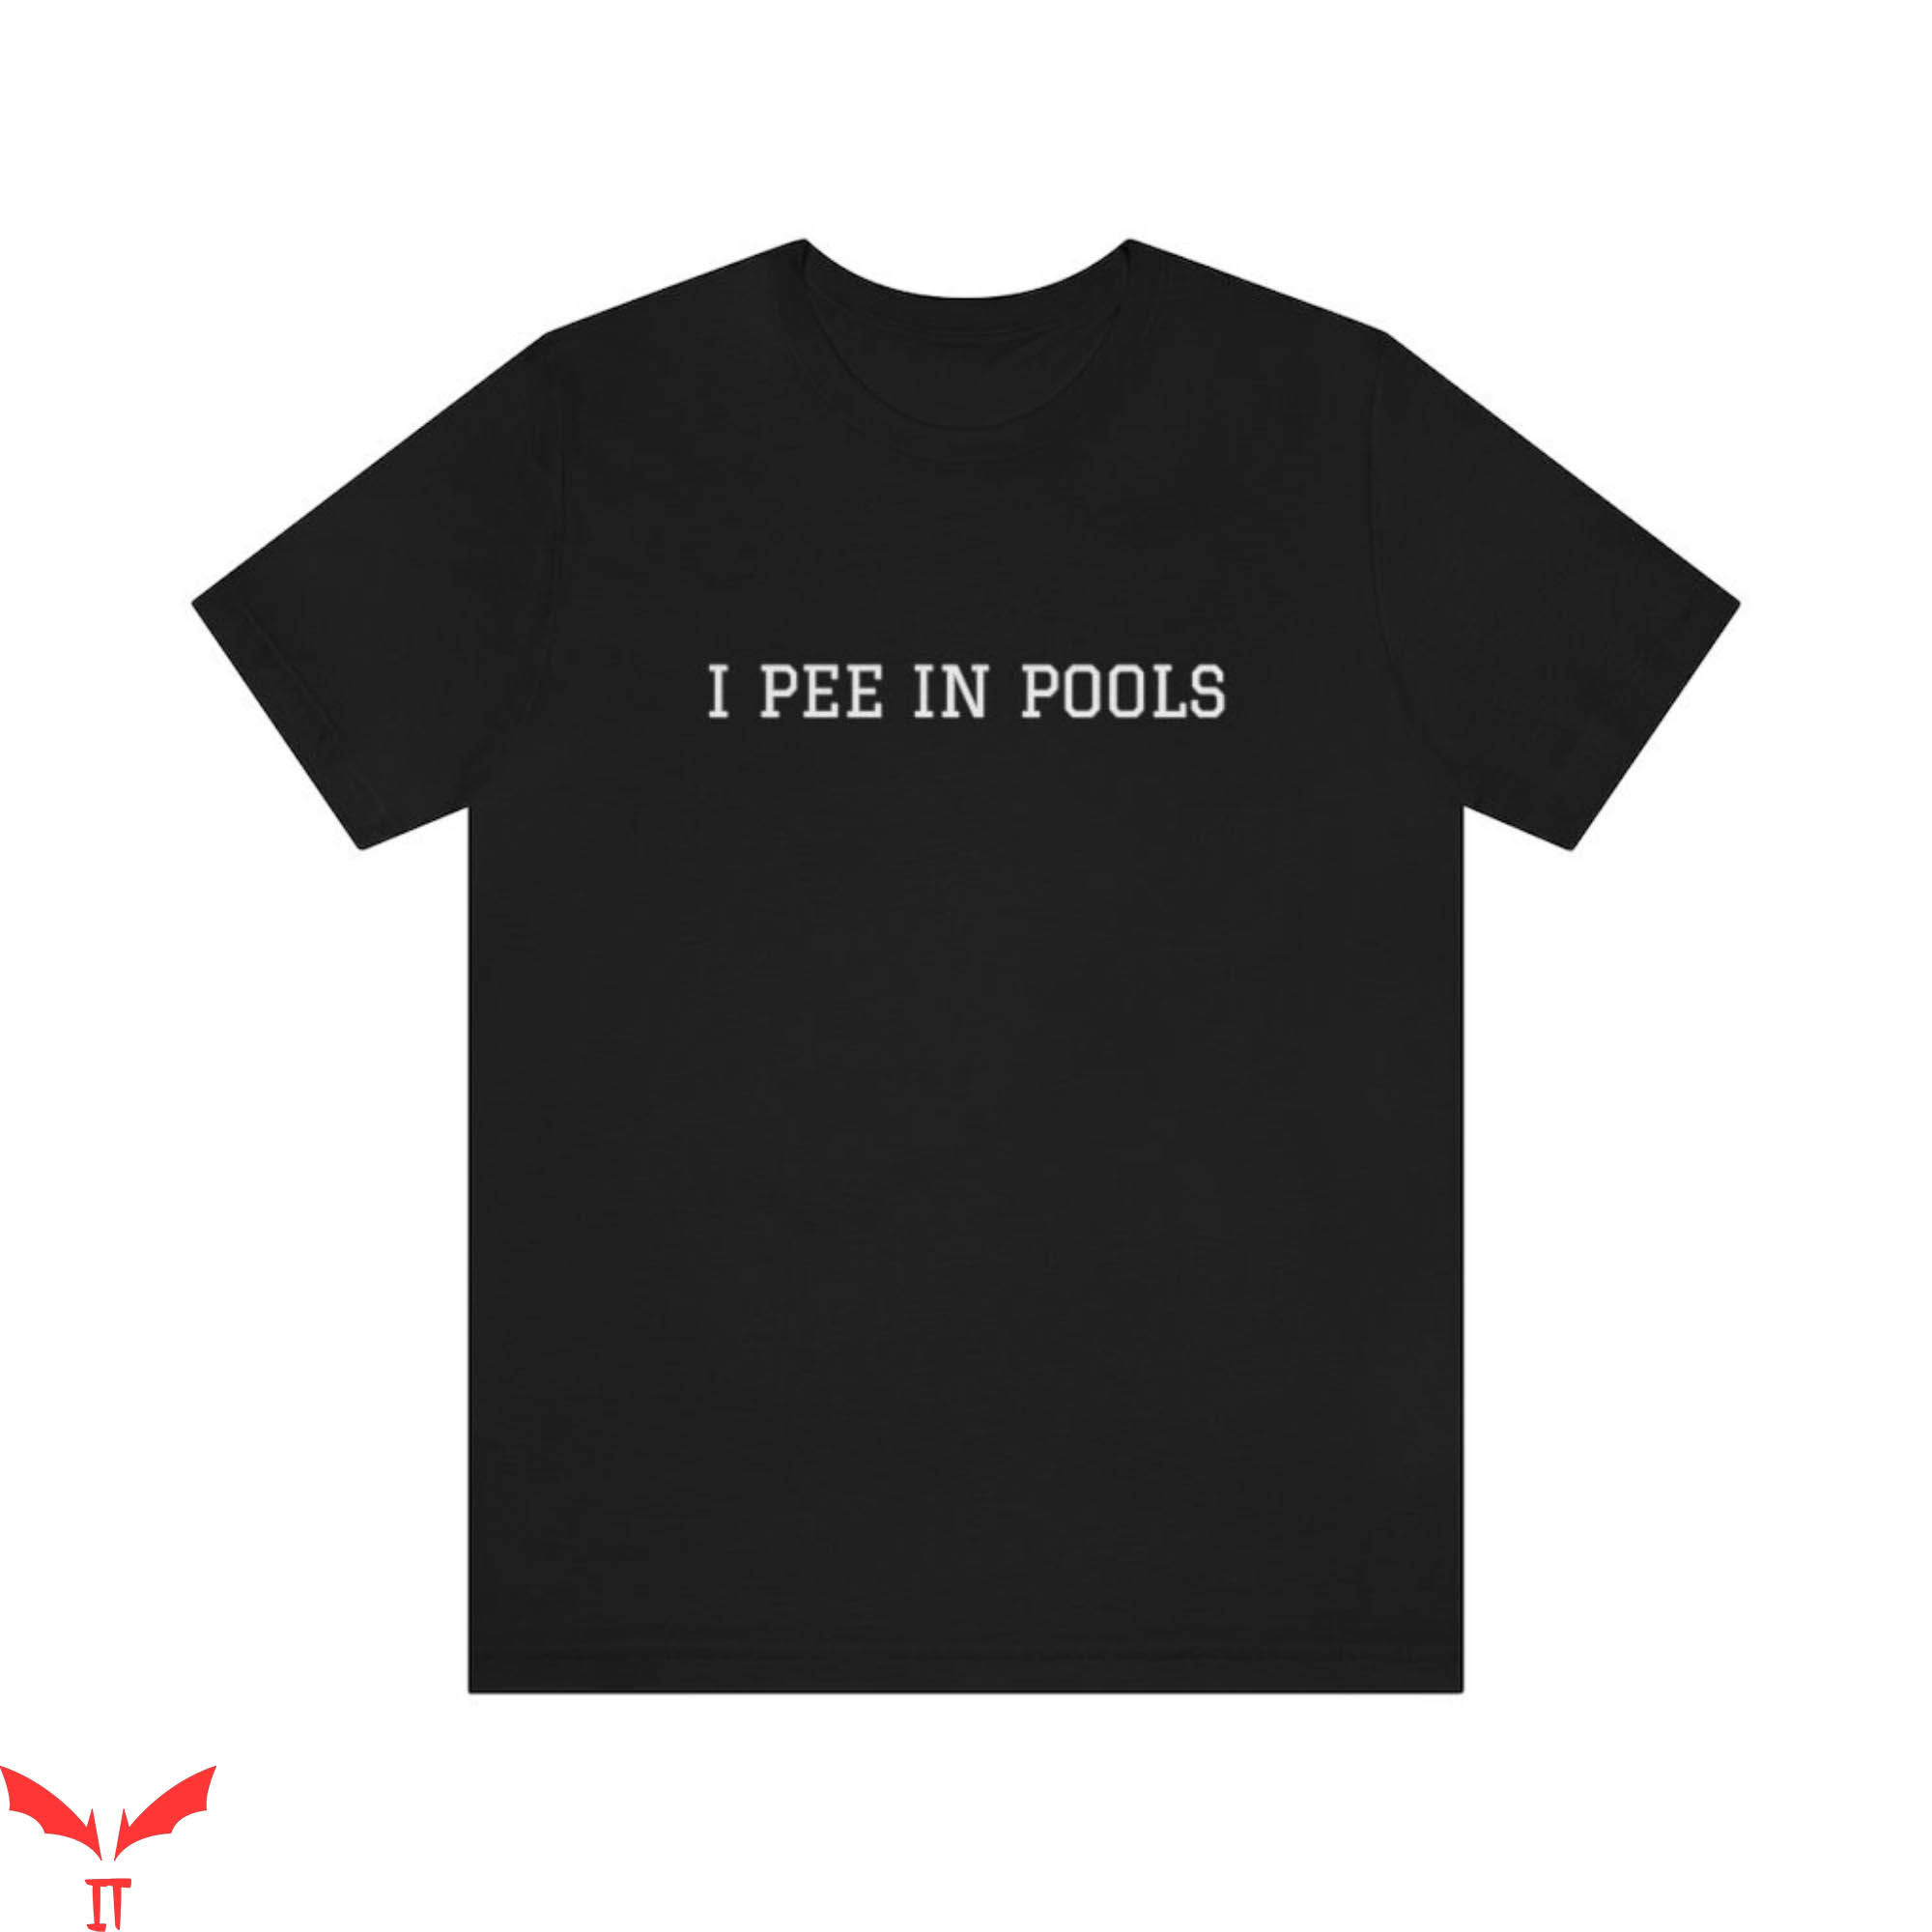 I Pee In Pools T-Shirt Funny Pool Party Summer Living Trendy